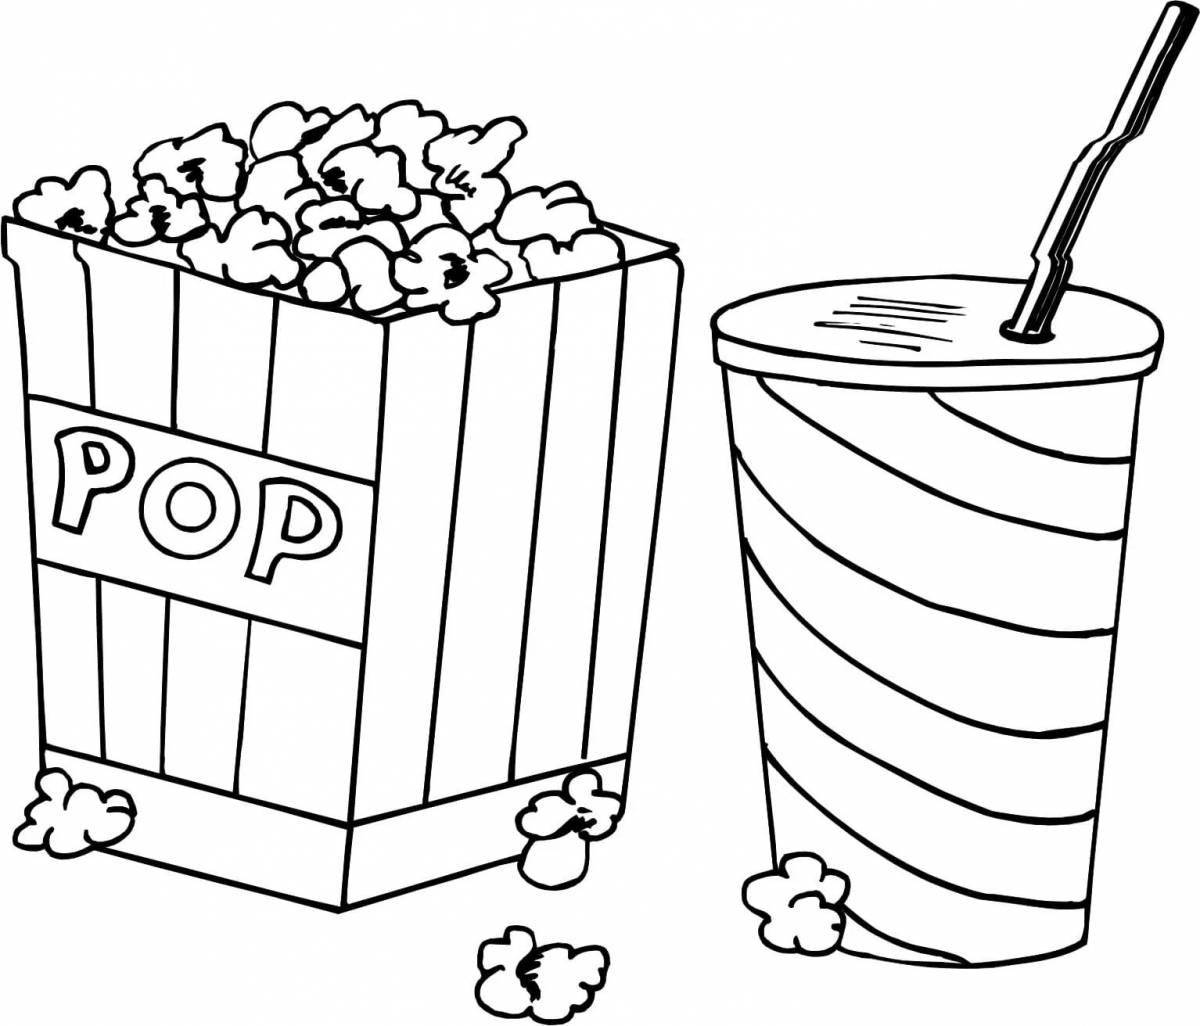 Outstanding popcorn coloring book for kids